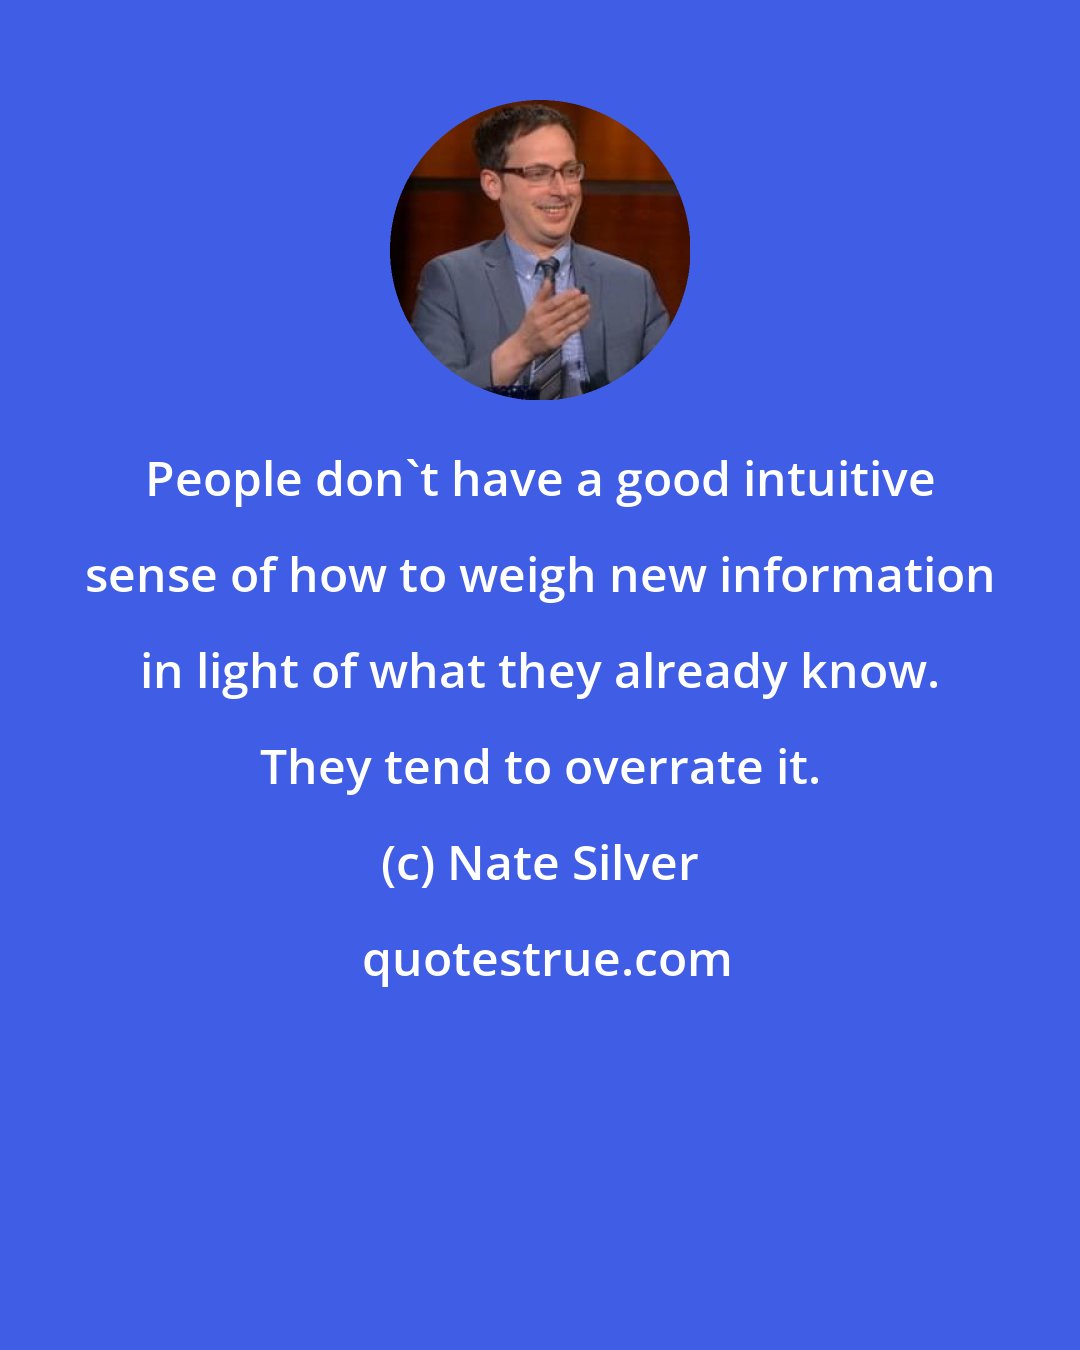 Nate Silver: People don't have a good intuitive sense of how to weigh new information in light of what they already know. They tend to overrate it.